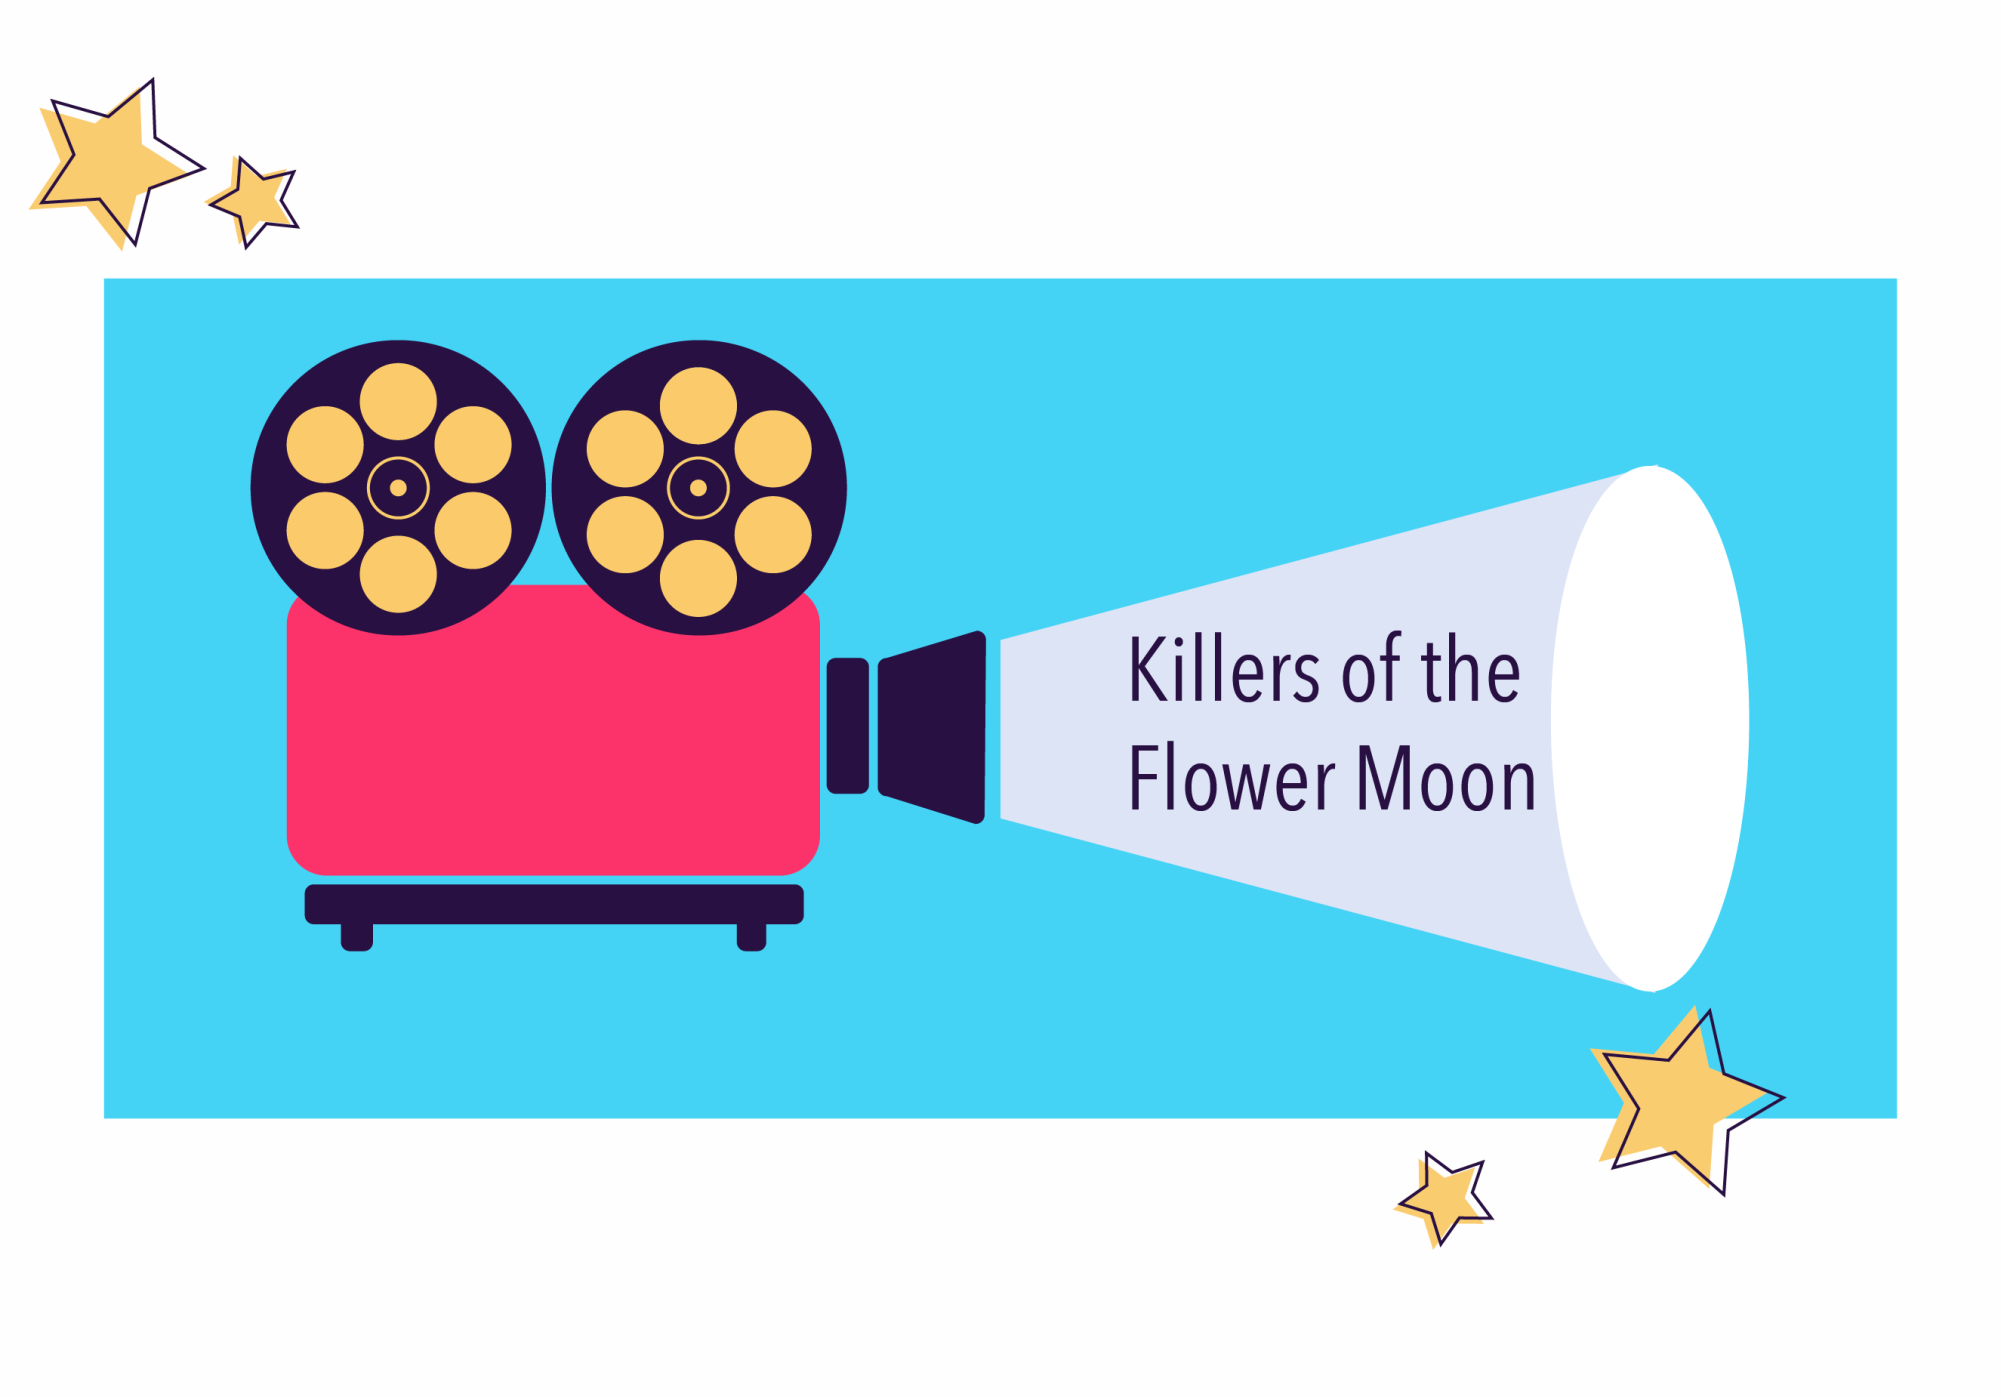 Killers of the Flower Moon is a 'masterpiece' and has near perfect